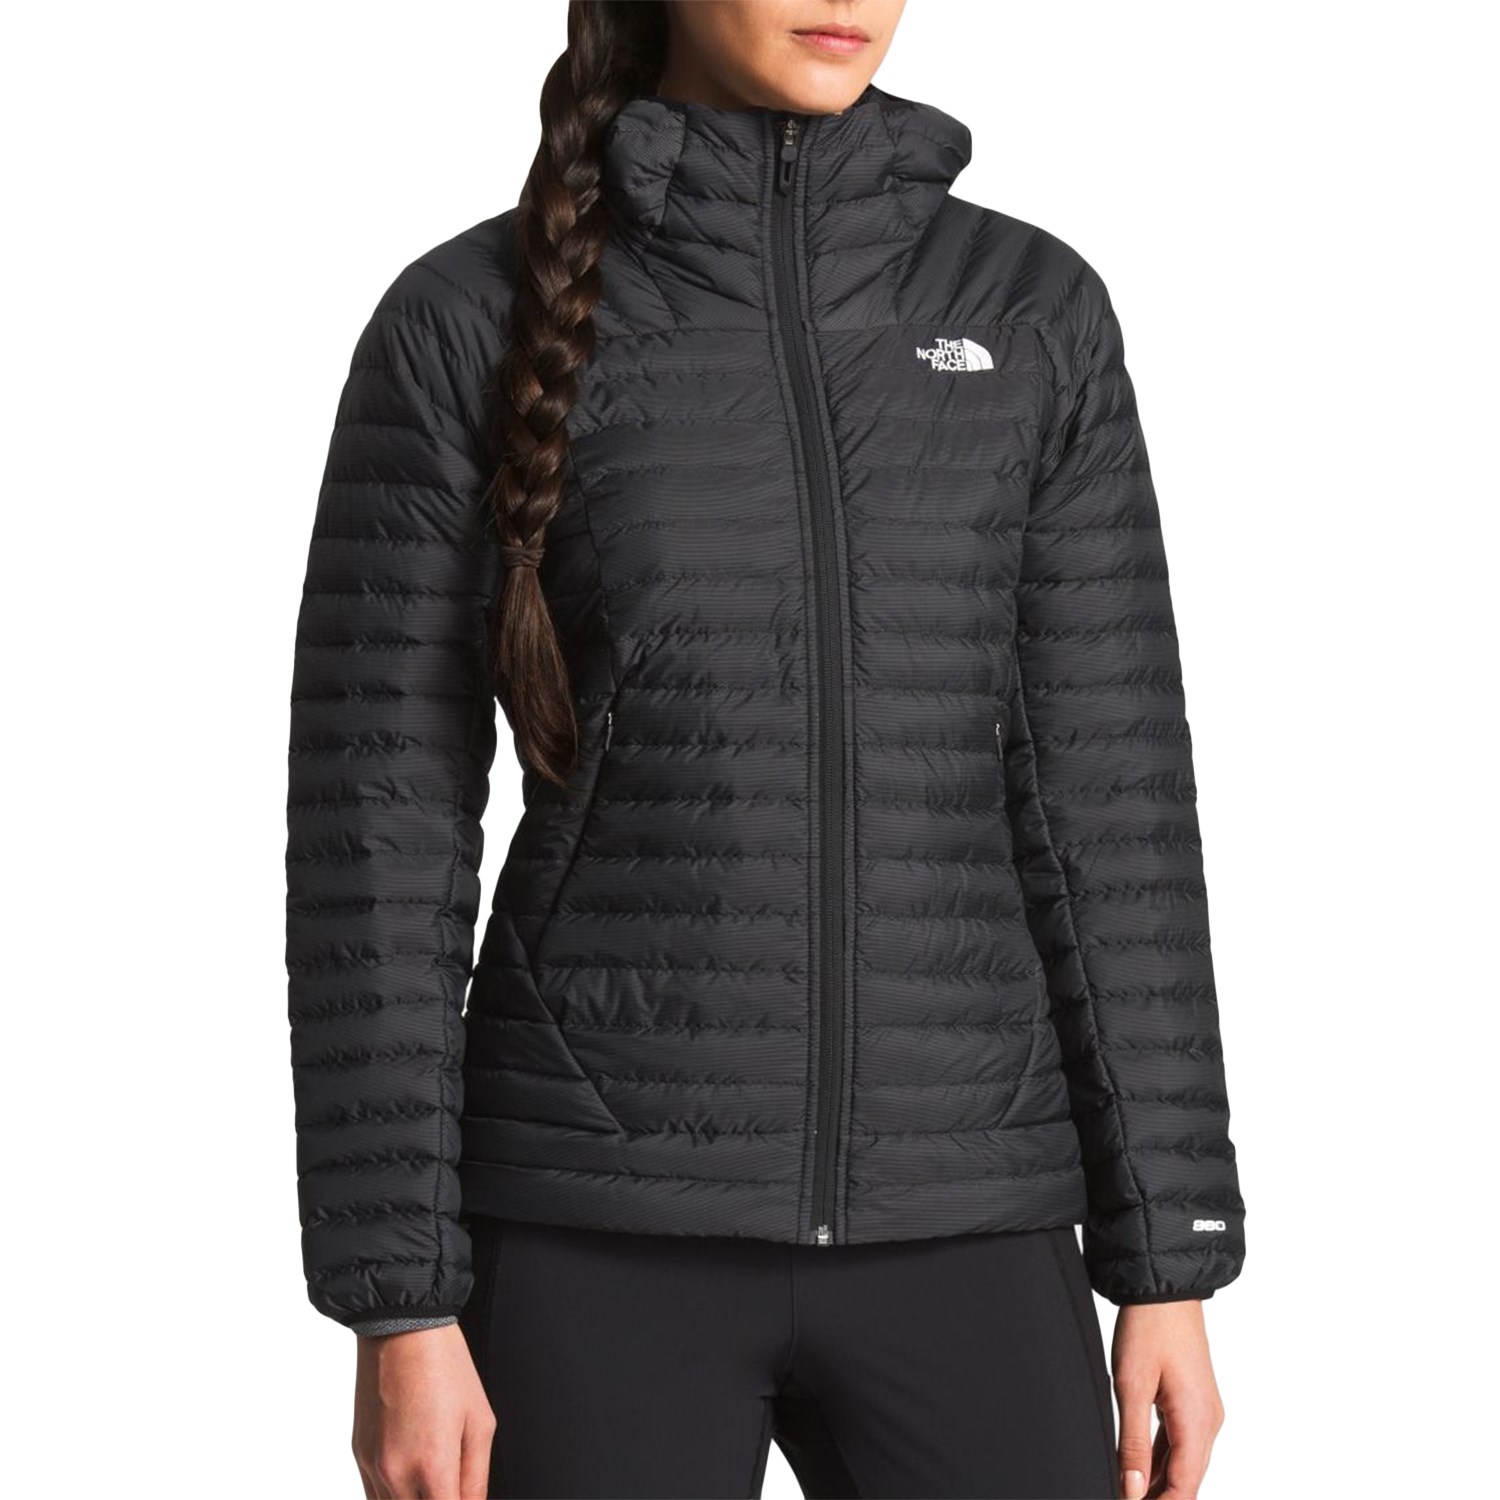 north face women's impendor jacket